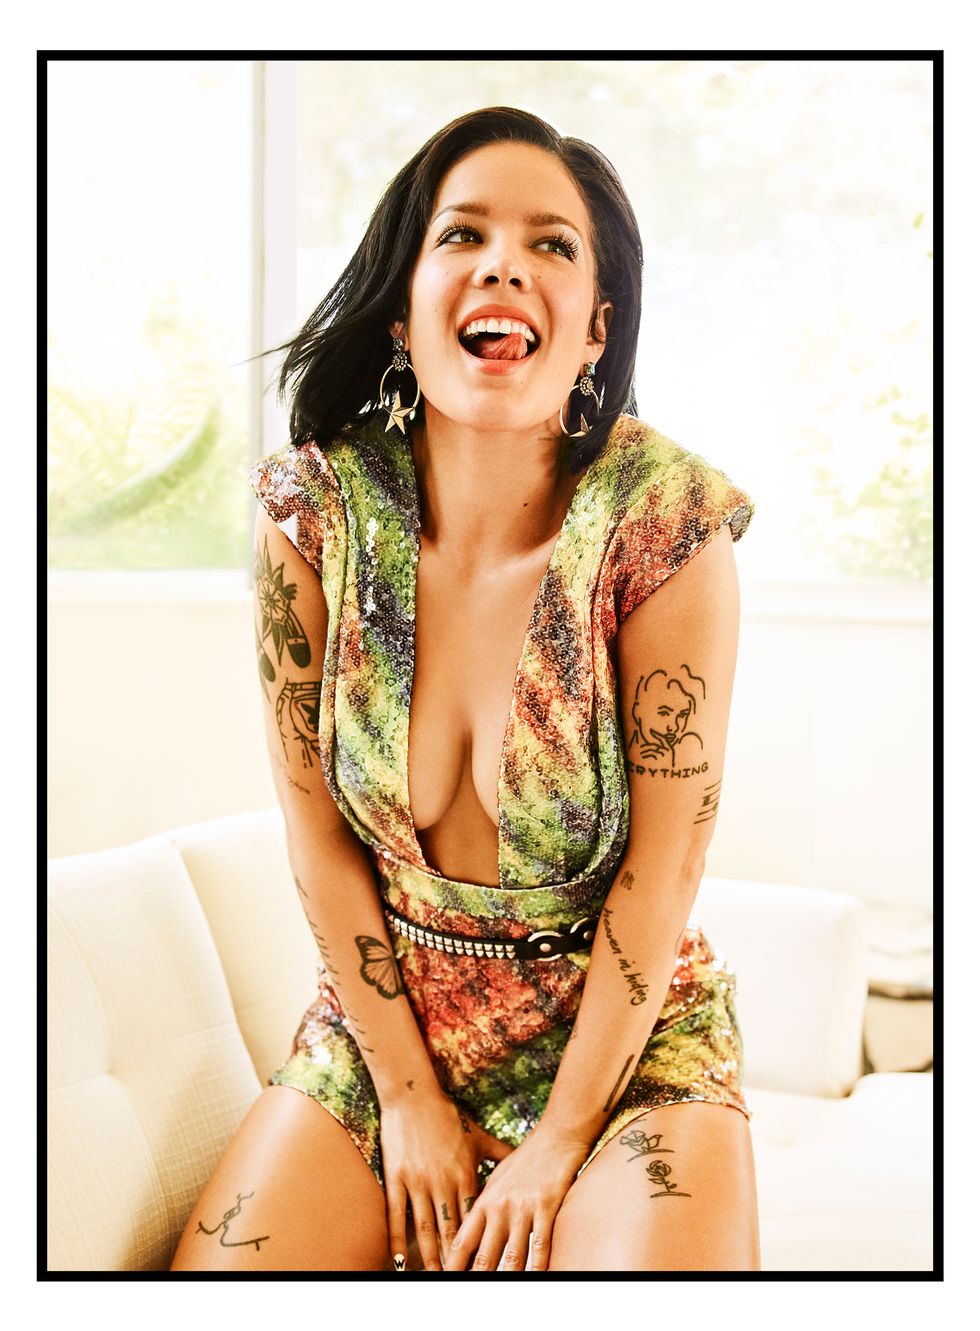 Facial expression, Beauty, Tattoo, Model, Smile, Shoulder, Thigh, Photo shoot, Leg, Photography, 